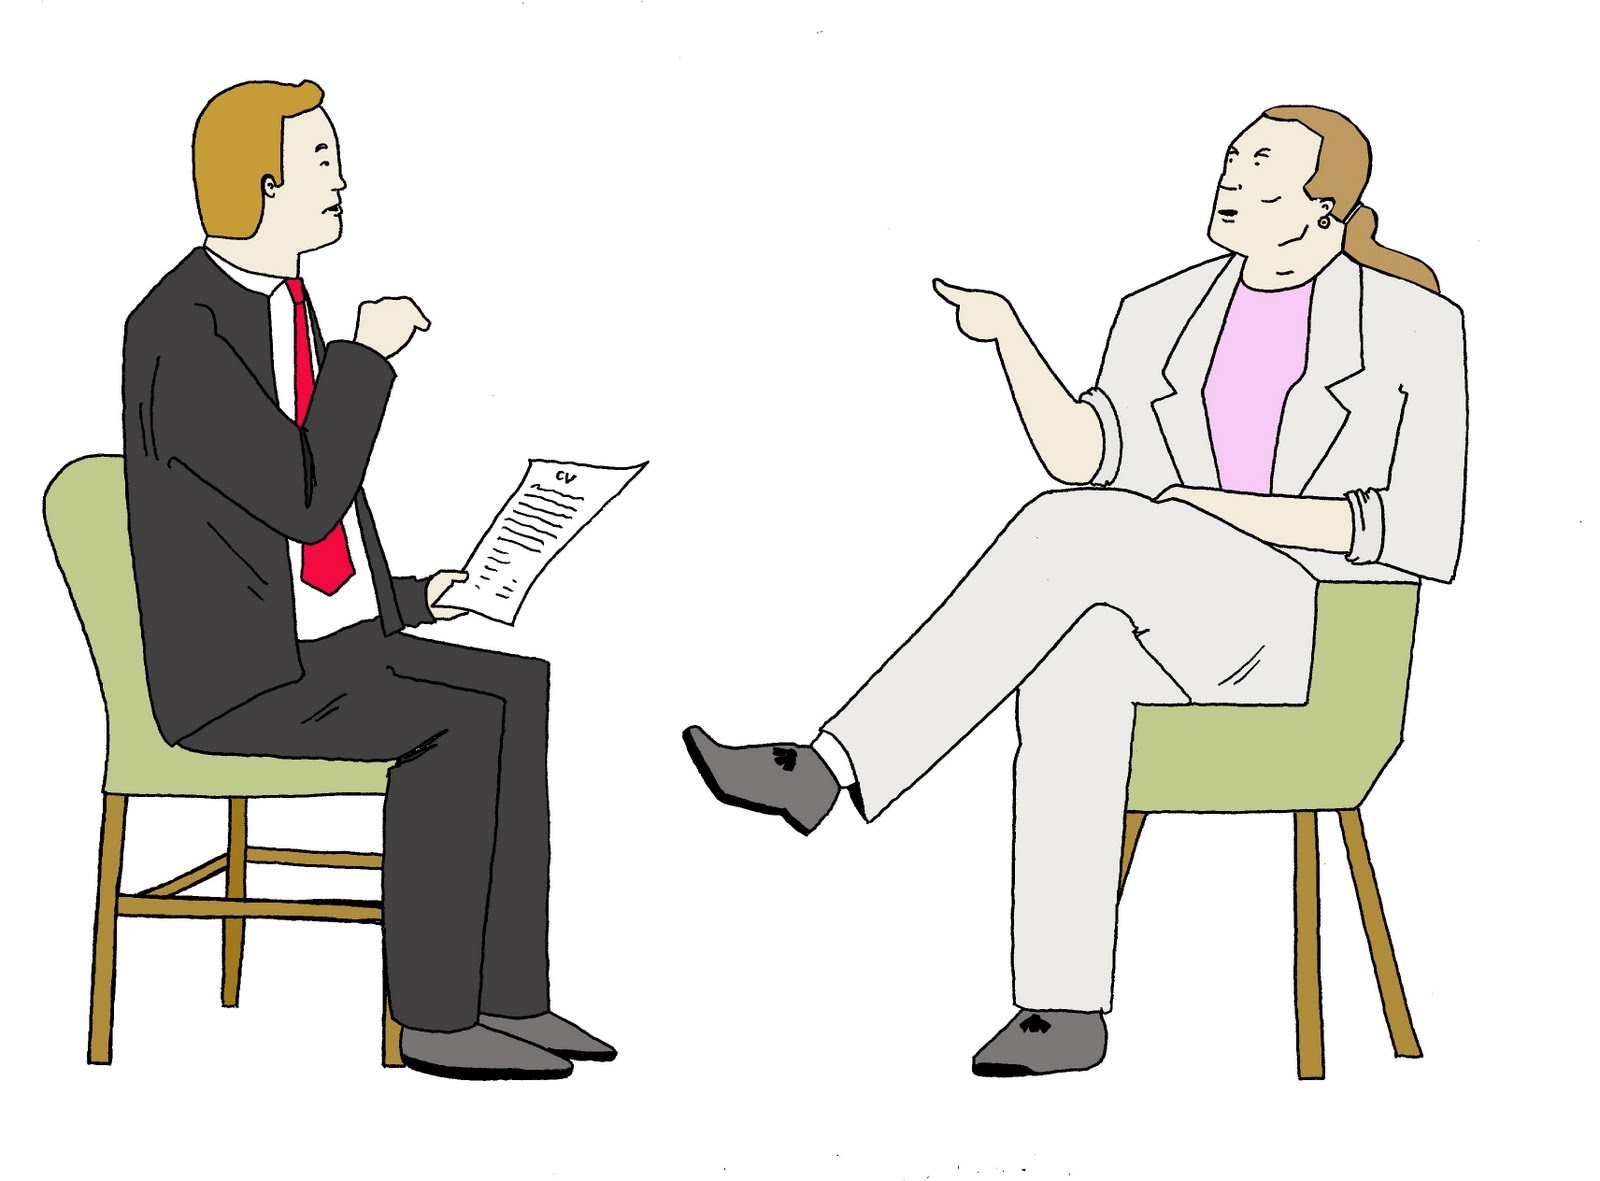 01-job-interview-cartoons-face-to-face-interview-interview-answers-personal-interview-questions